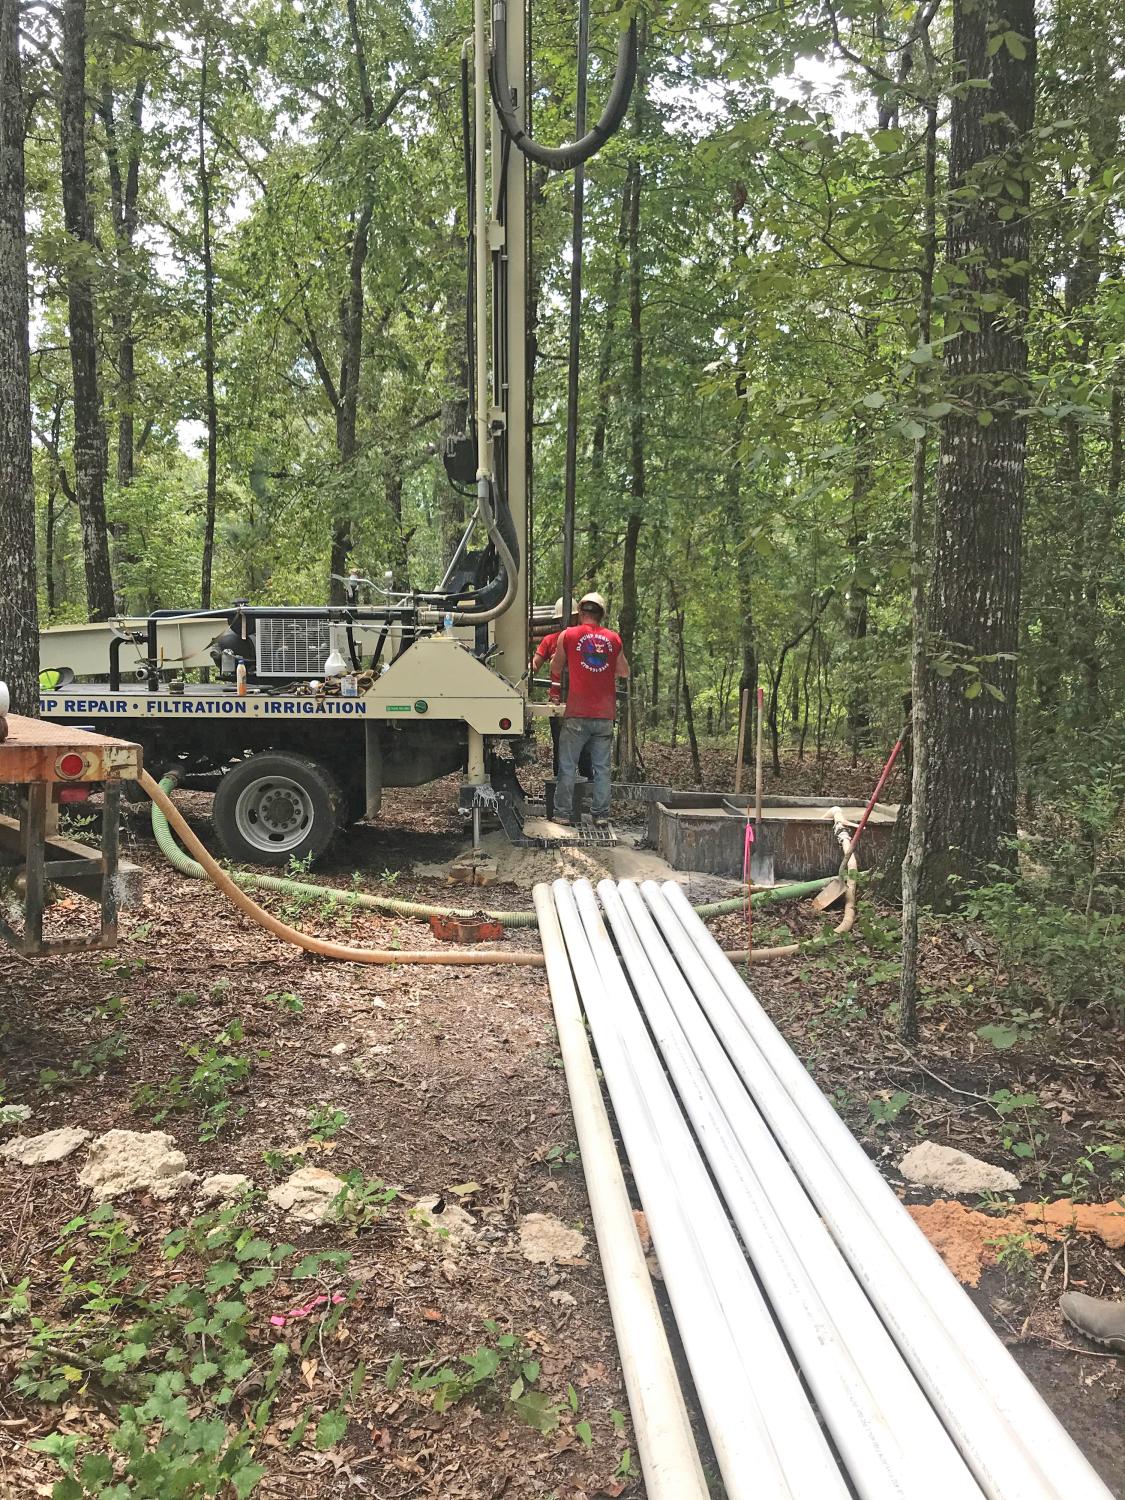 Installing a well with DRILLMAX® DM250 in tough geologies around Knoxville, Georgia.